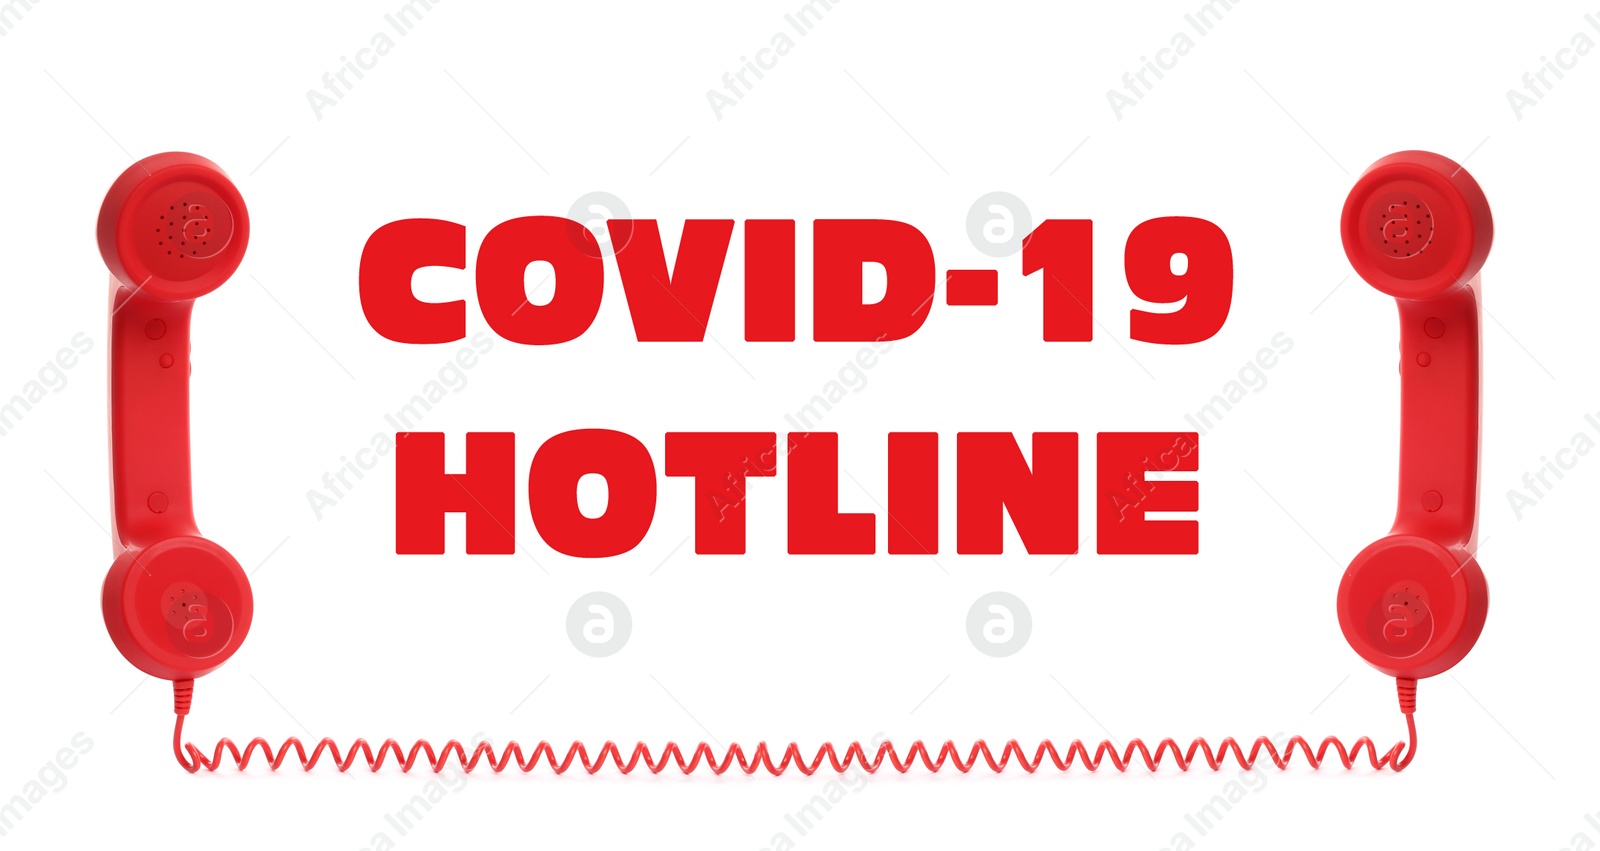 Image of Covid-19 Hotline. Red handsets and text on white background, banner design 